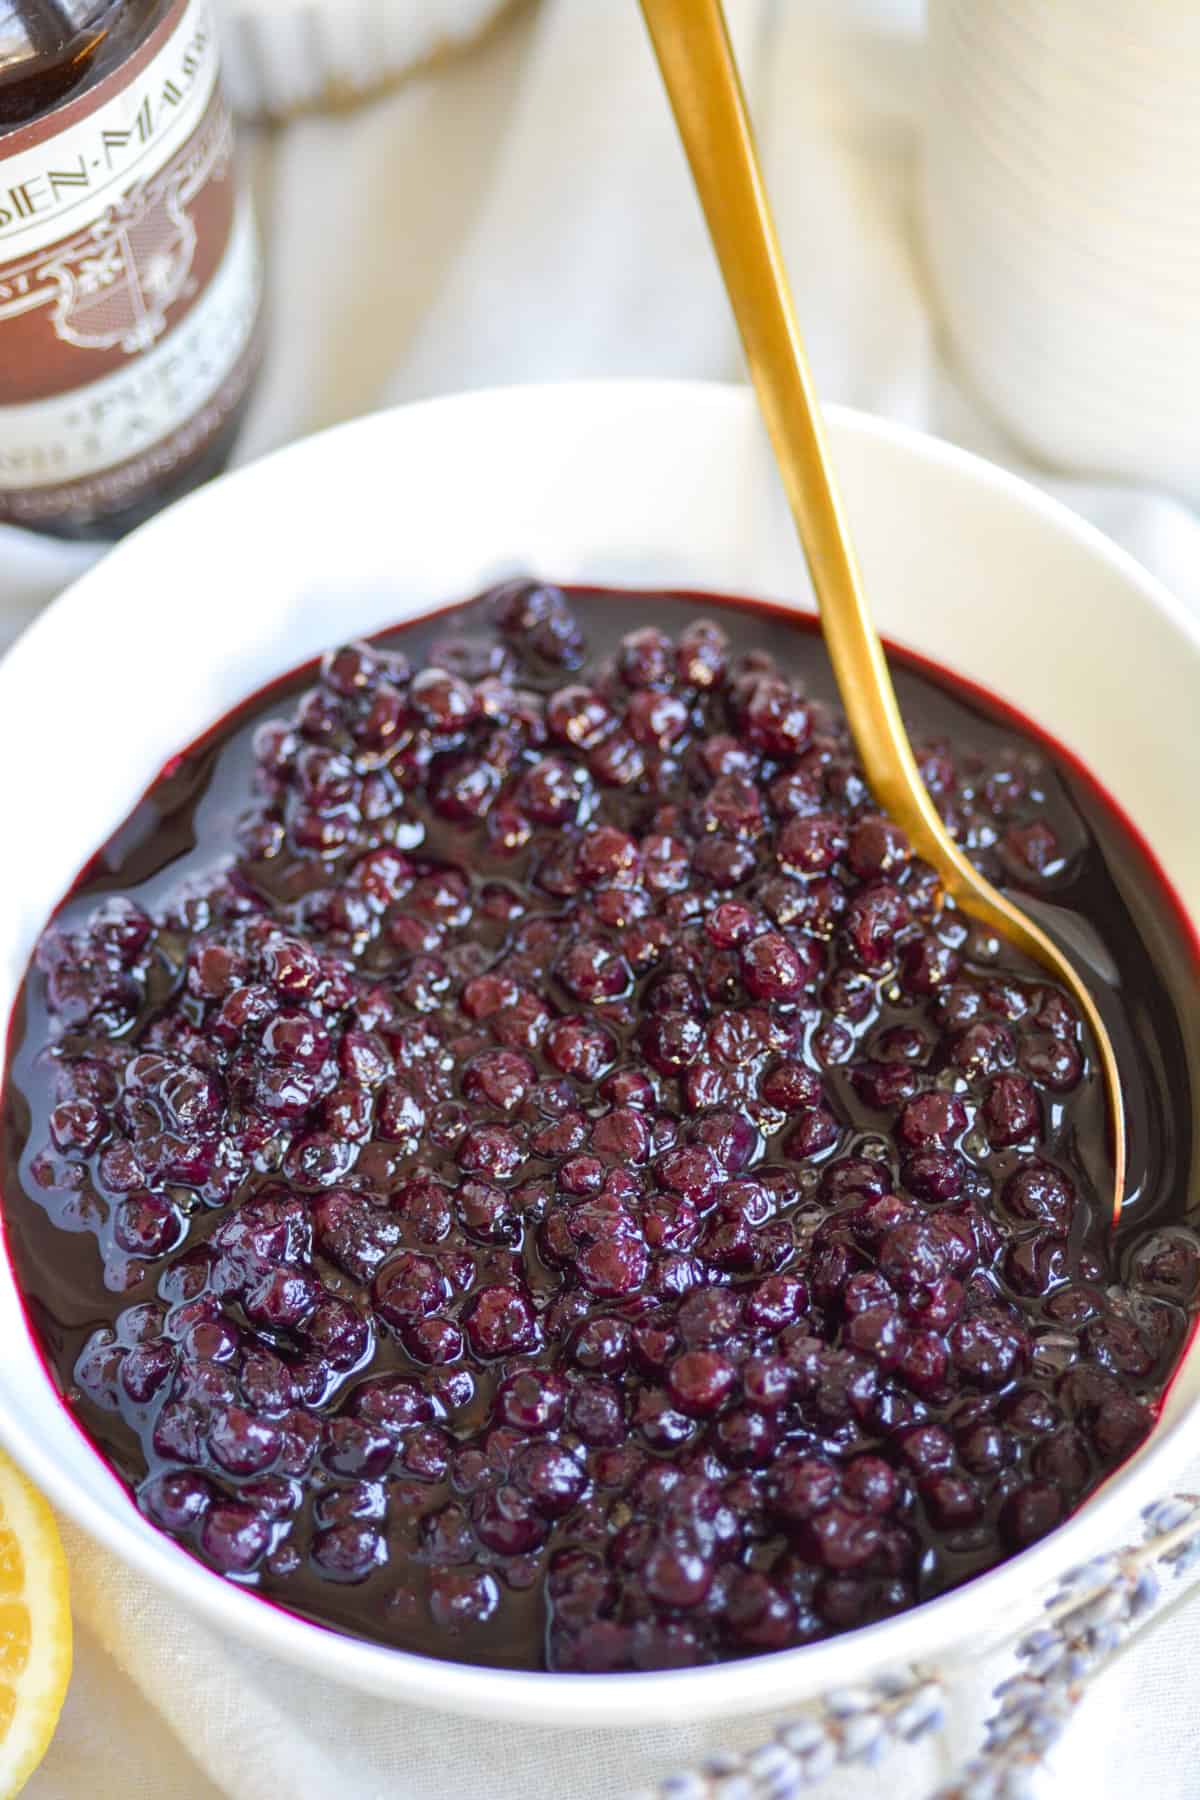 Blueberry Compote recipe in a white bowl with a gold spoon in it.